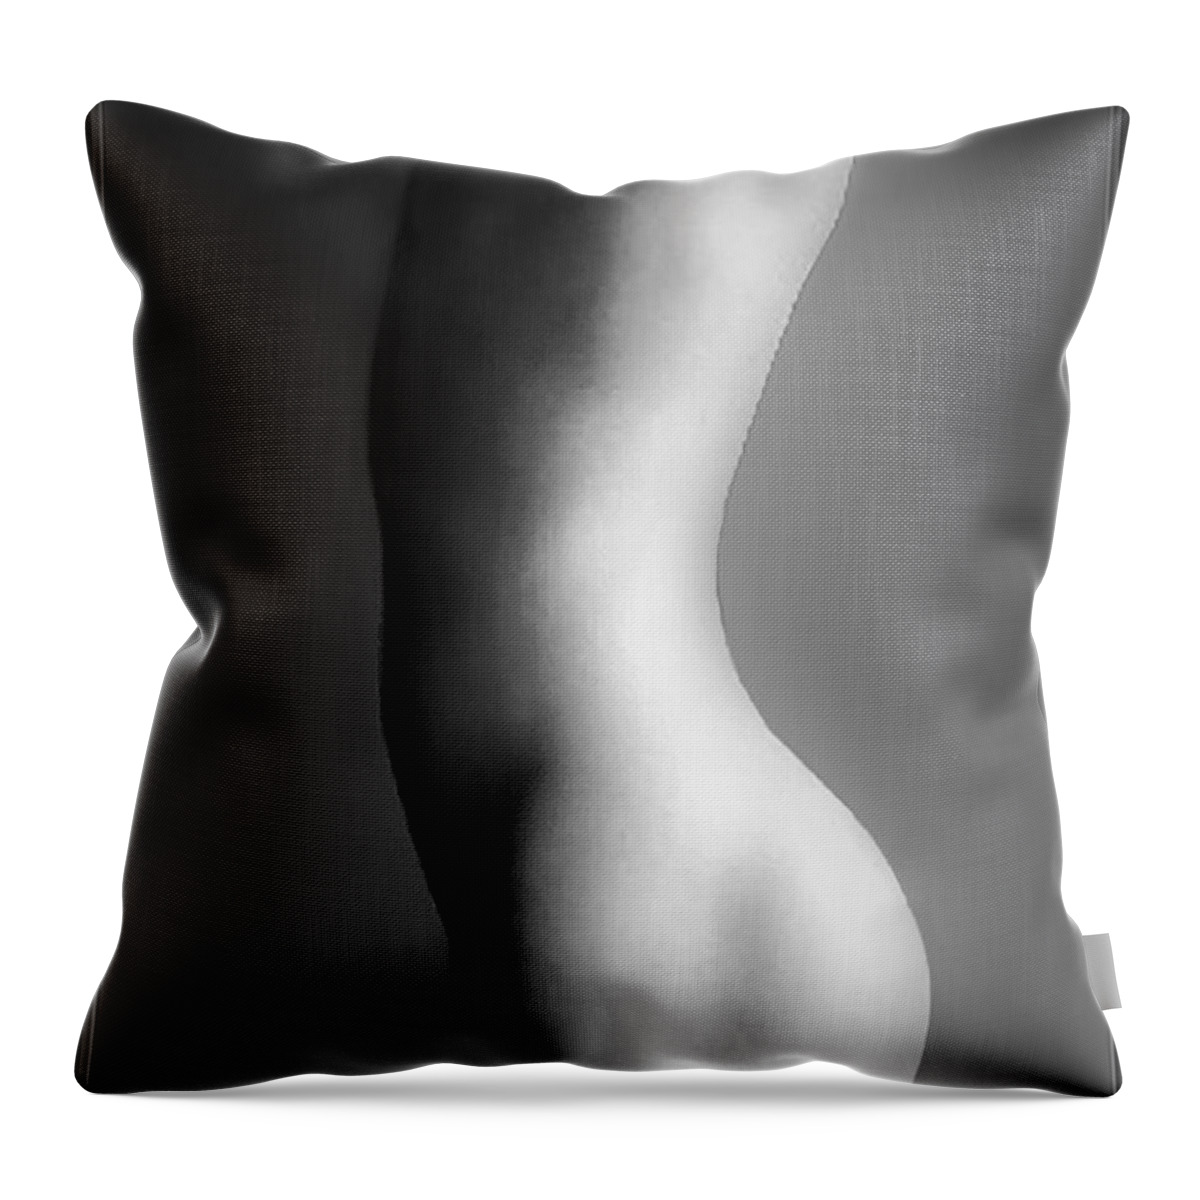  Throw Pillow featuring the digital art Andro by James Lanigan Thompson MFA